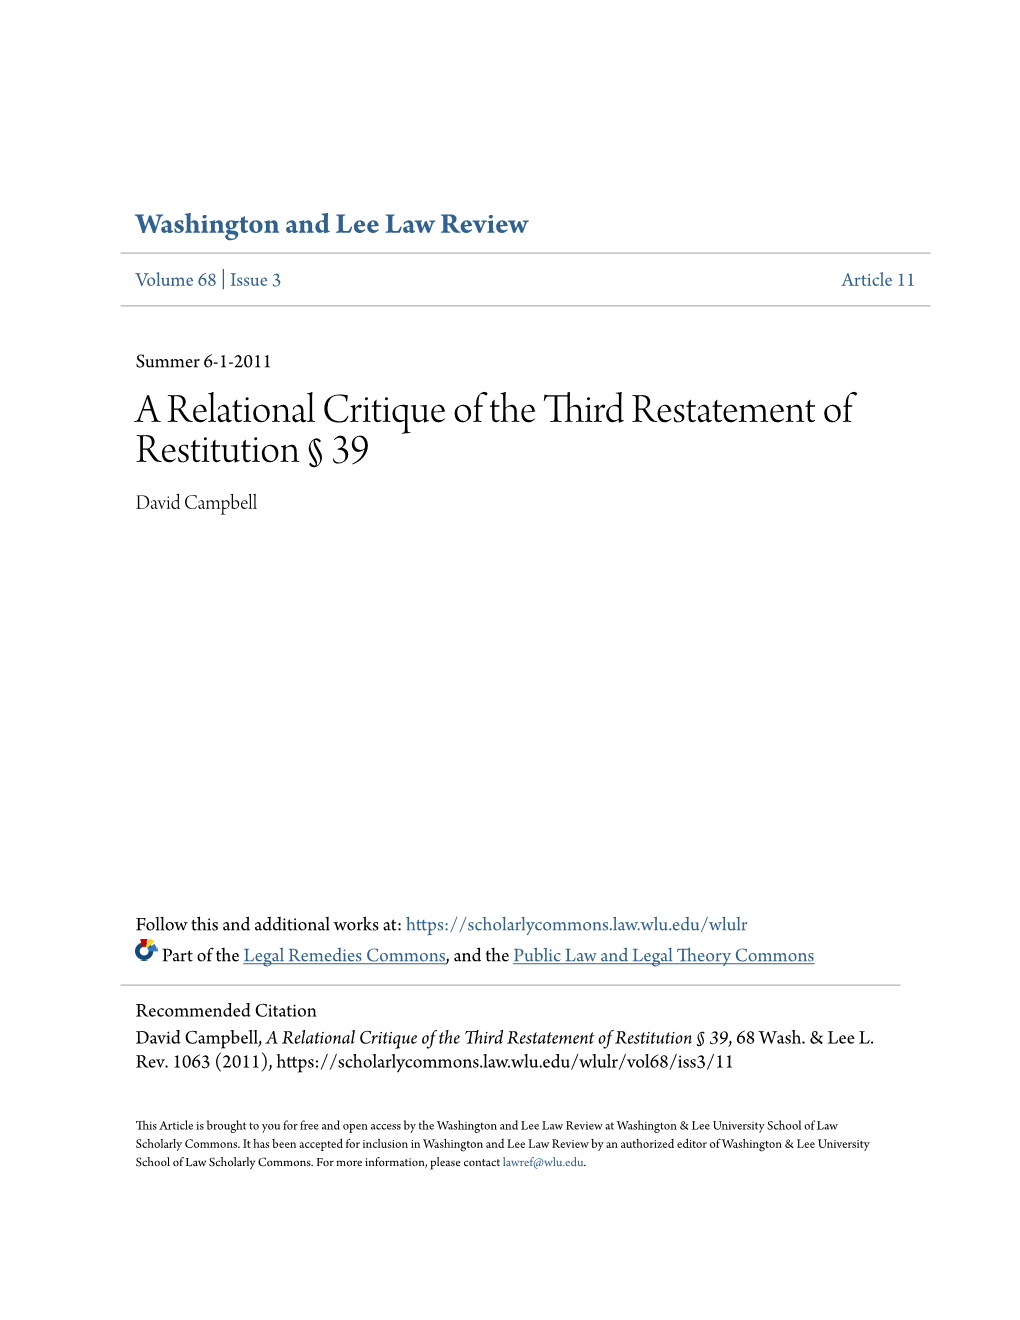 A Relational Critique of the Third Restatement of Restitution Â§ 39